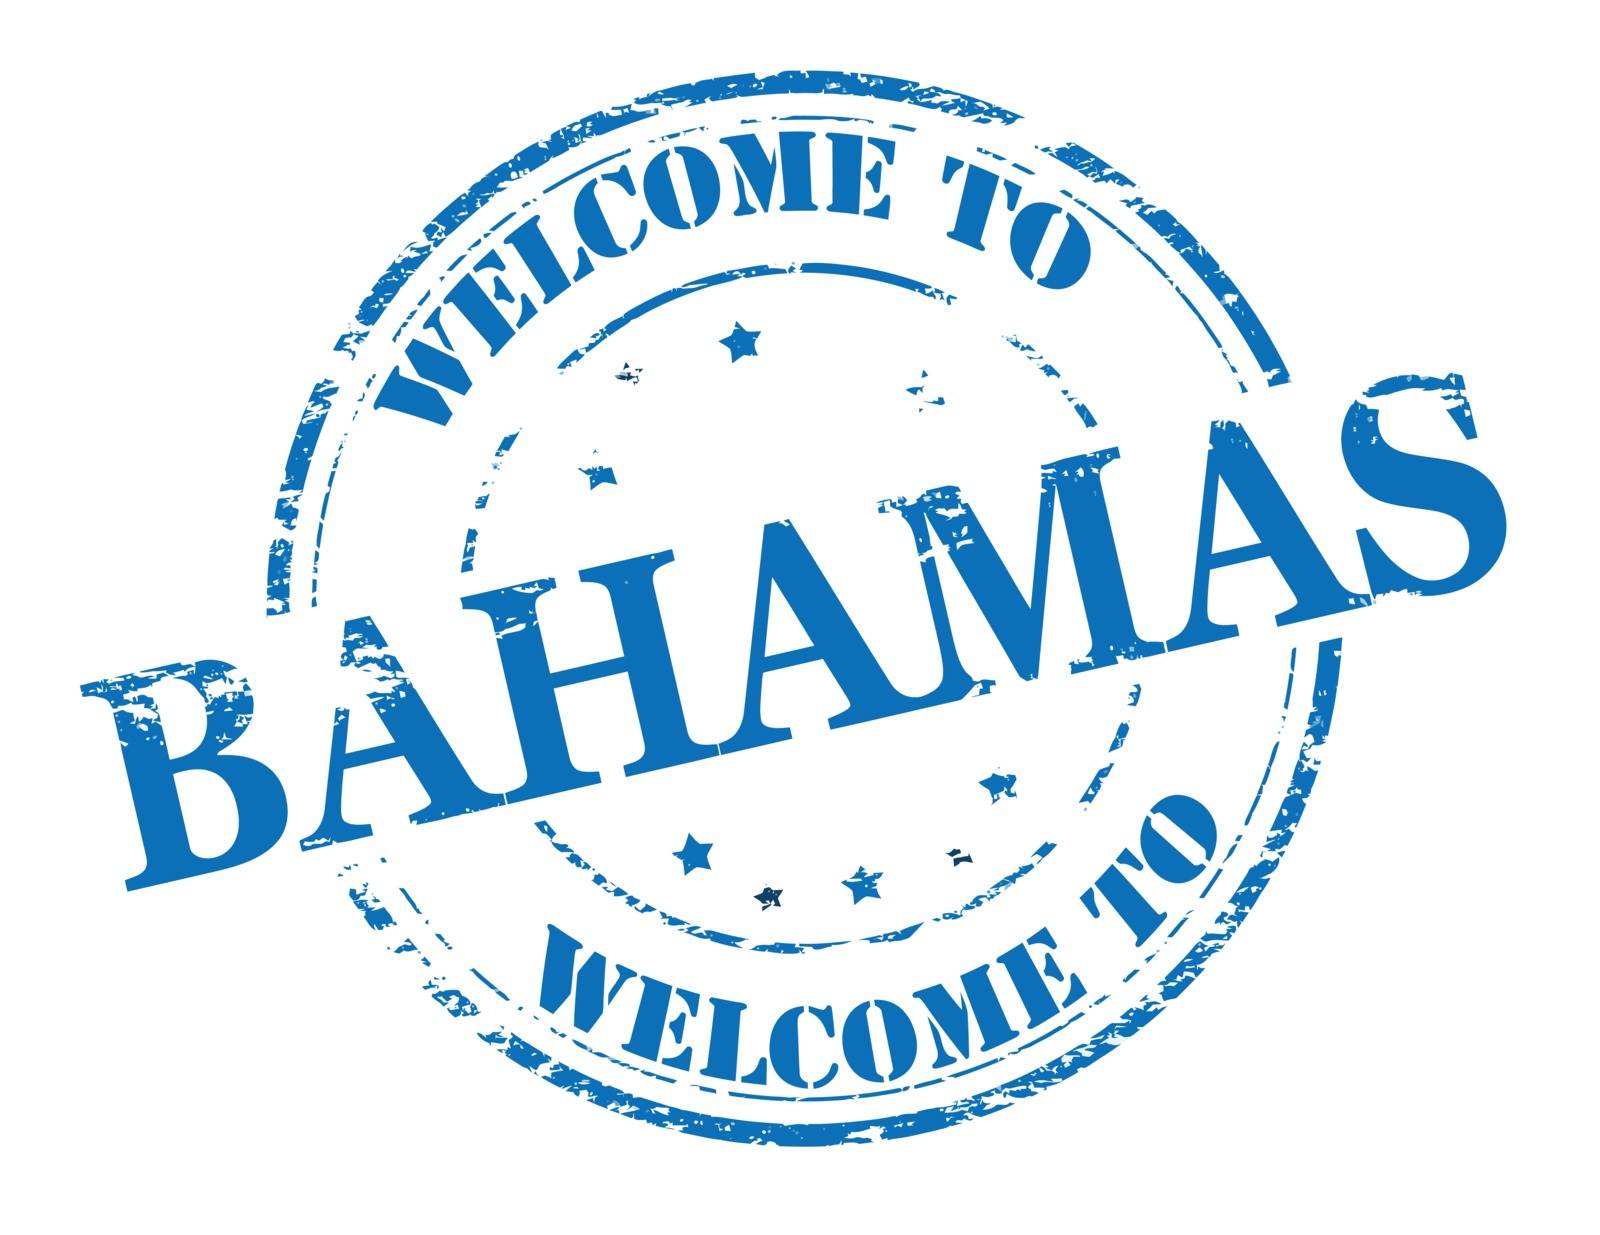 Welcome to Bahamas by carmenbobo